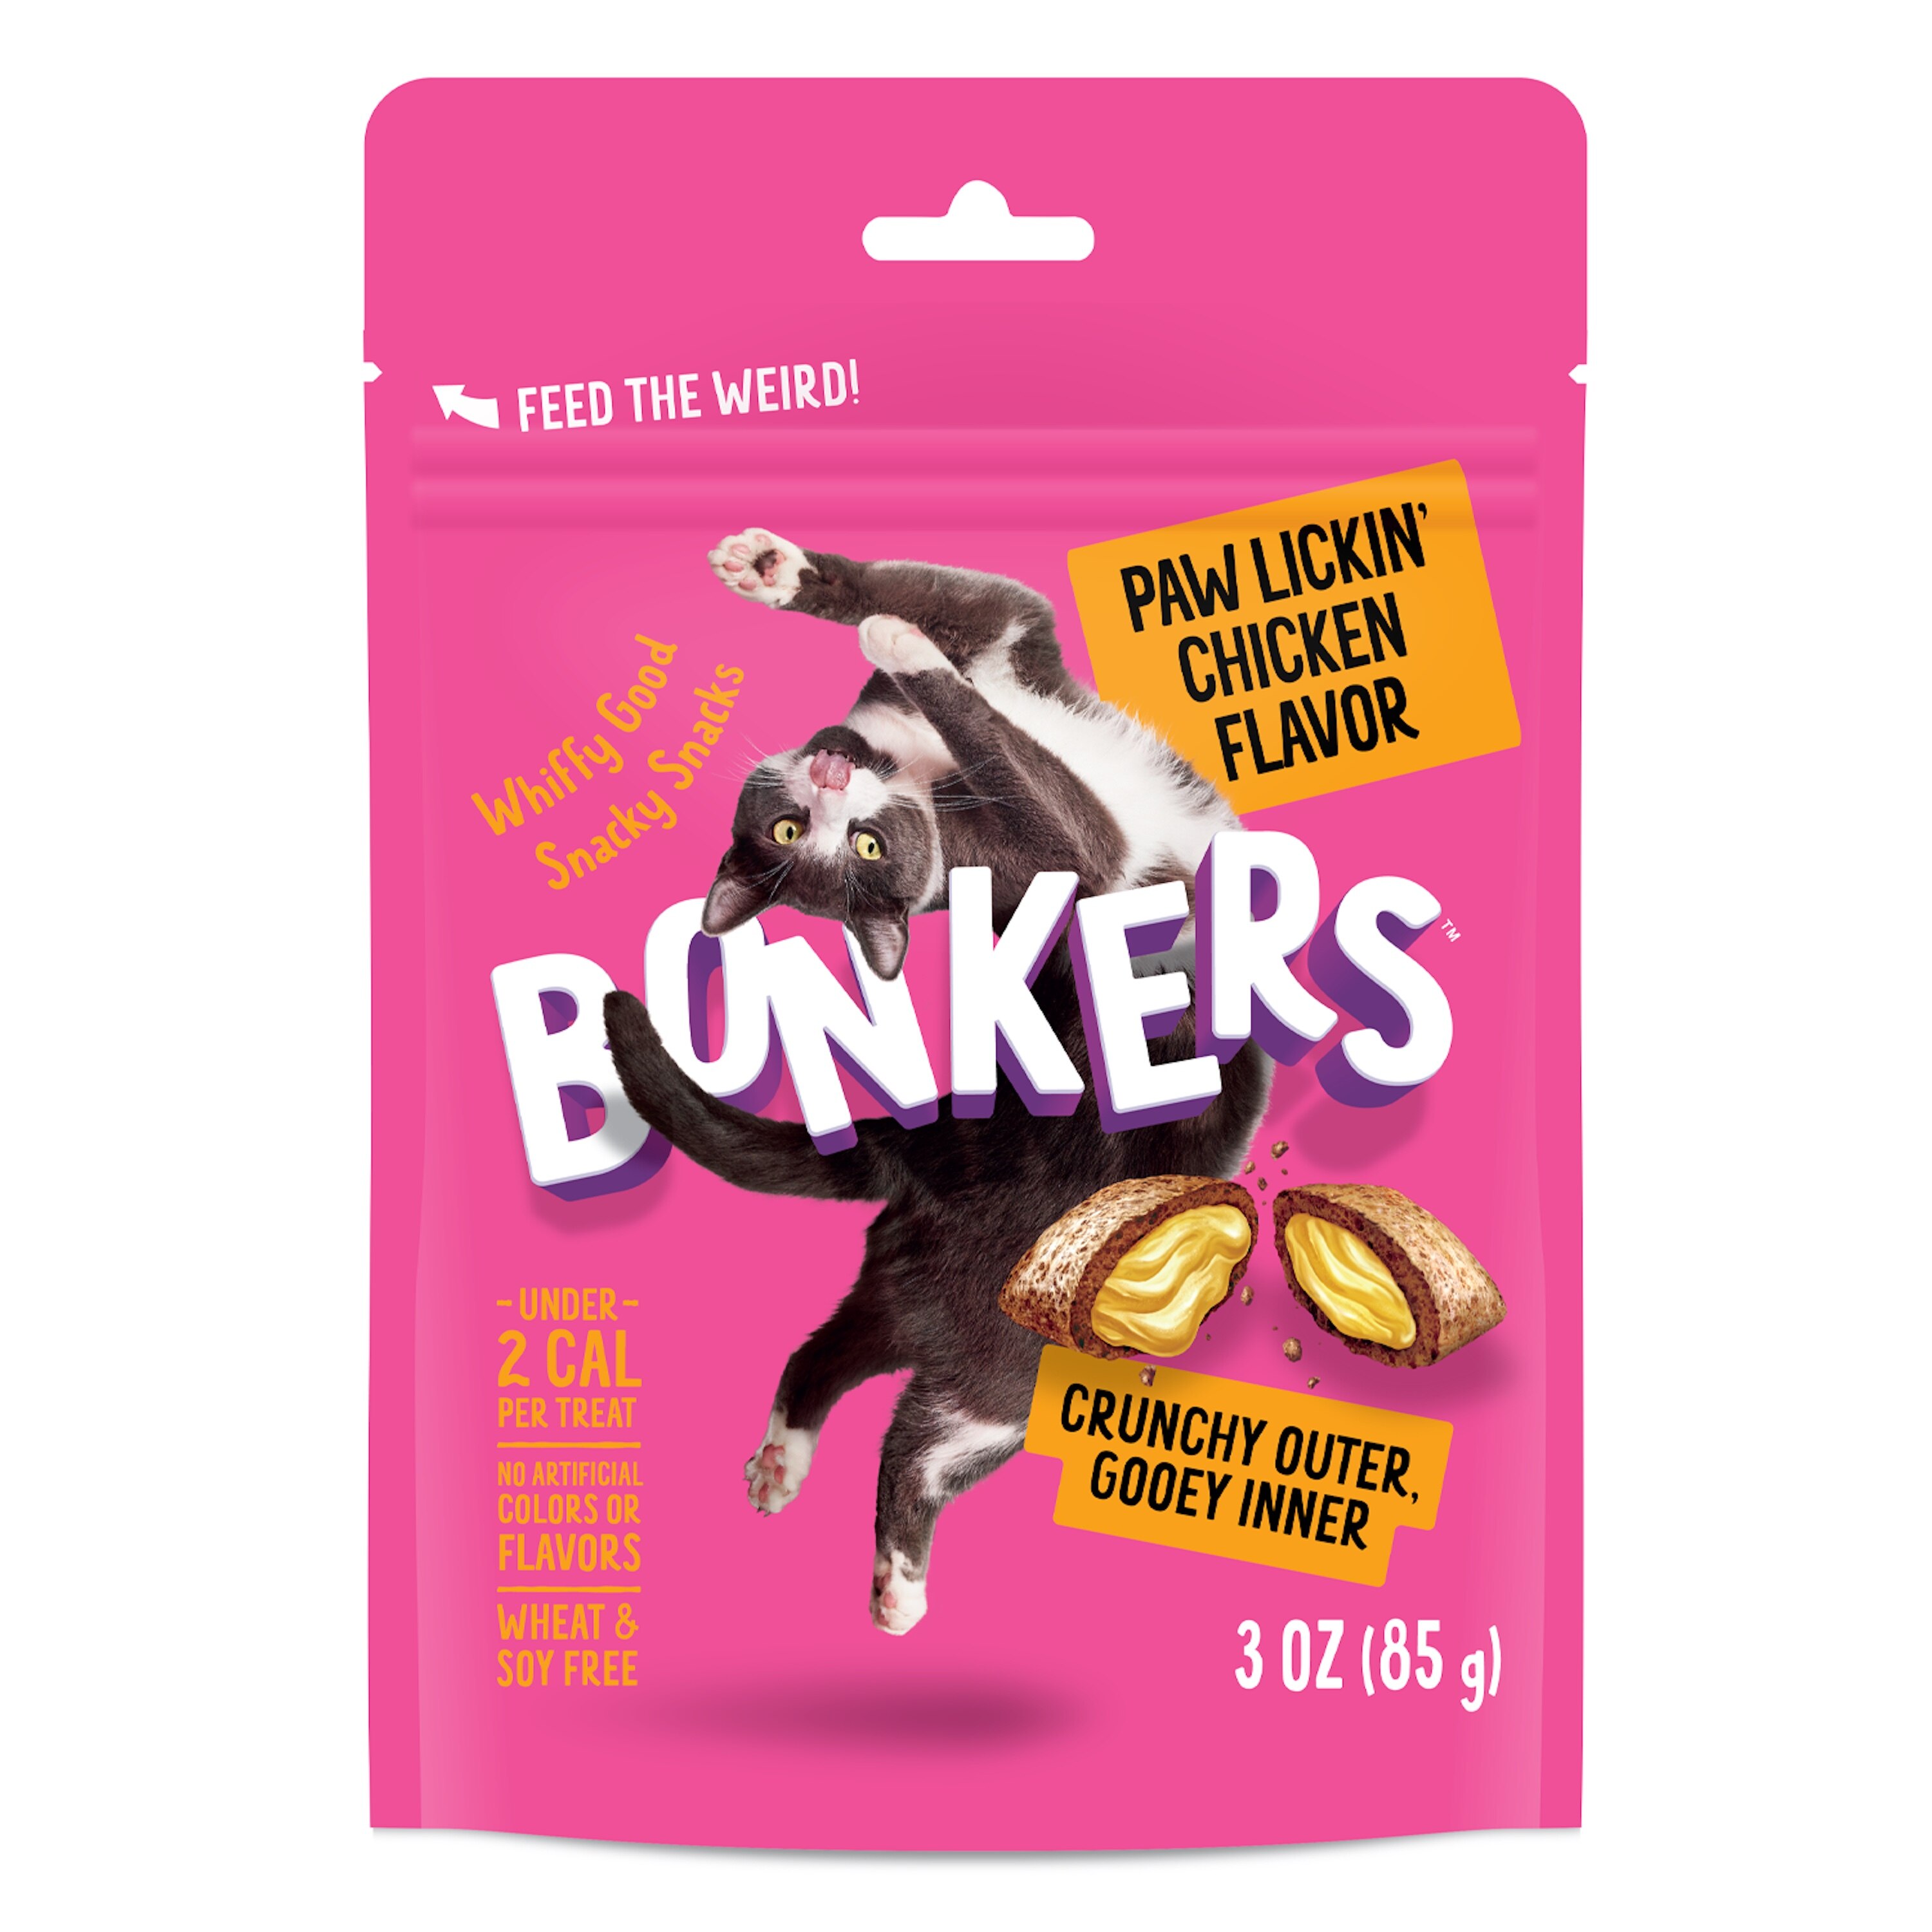 BONKERS Crunchy and Soft Cat Treats, Paw Lickin' Chicken Flavor, 3oz CRUNCHY AND SOFT CAT TREATS PAW LICKIN' CHICKEN FLAVOR, 3oz